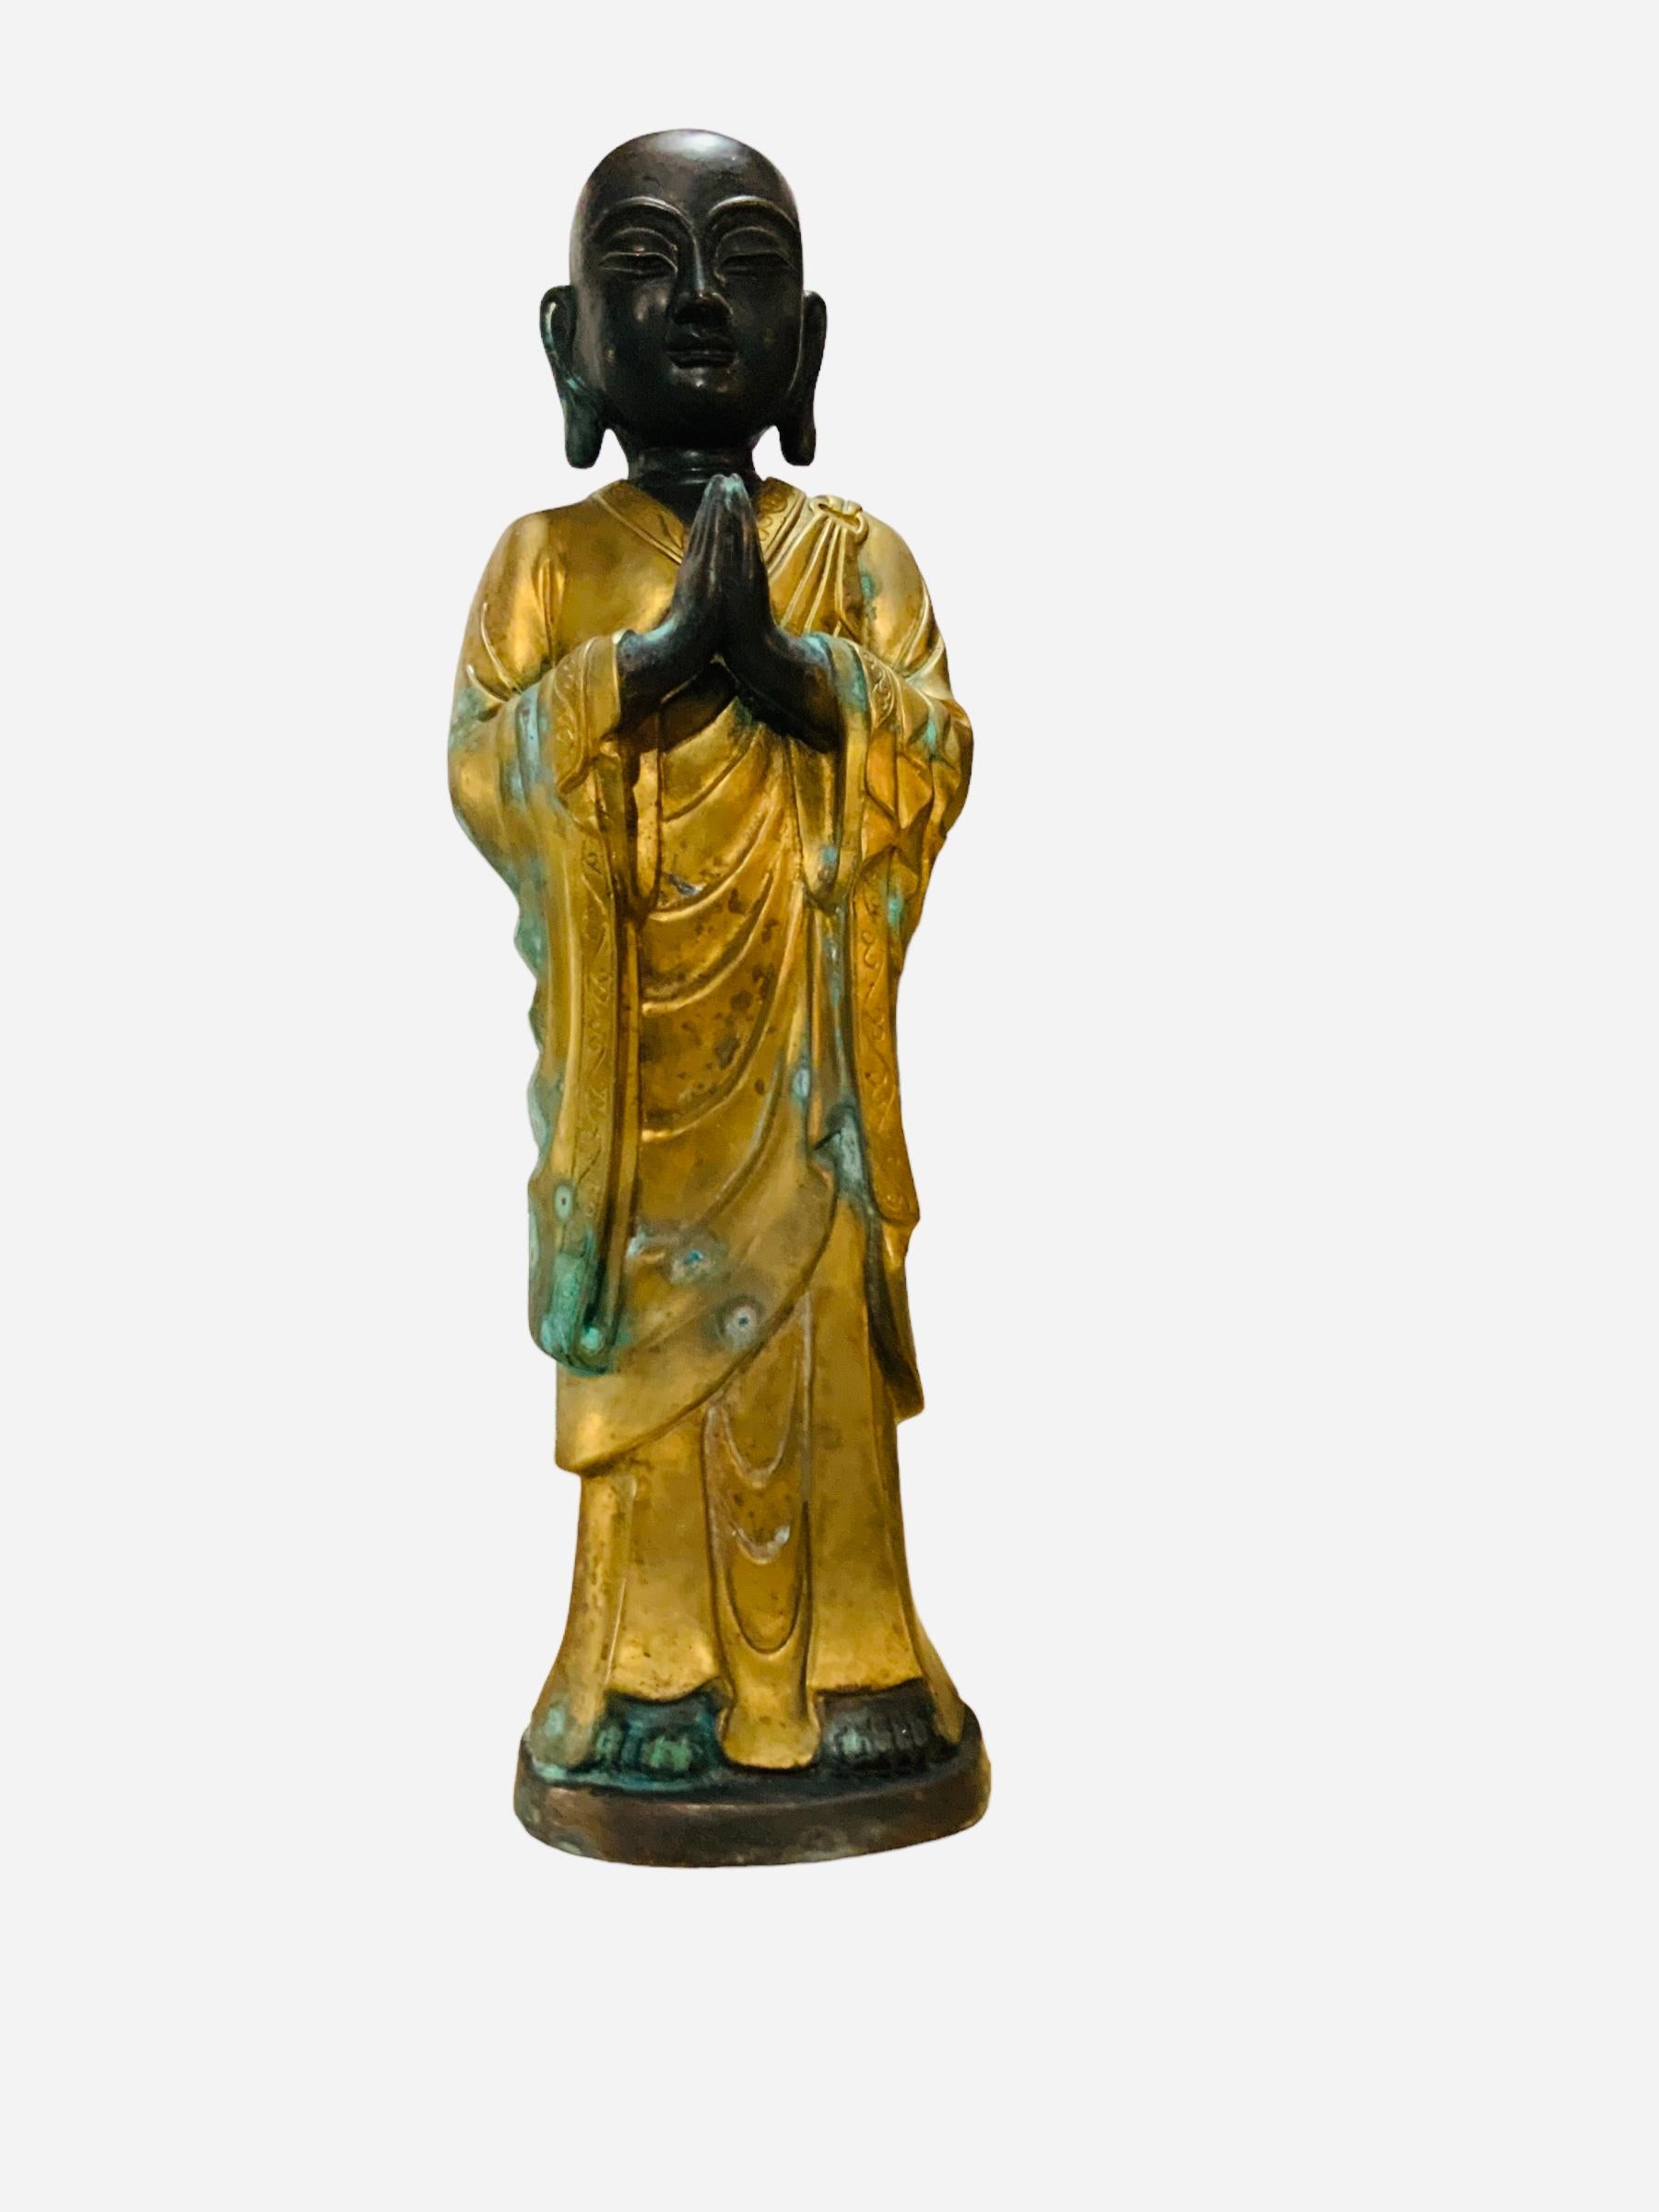 Chinese Gilt Patinated Bronze Small Sculpture of a Luohan For Sale 7